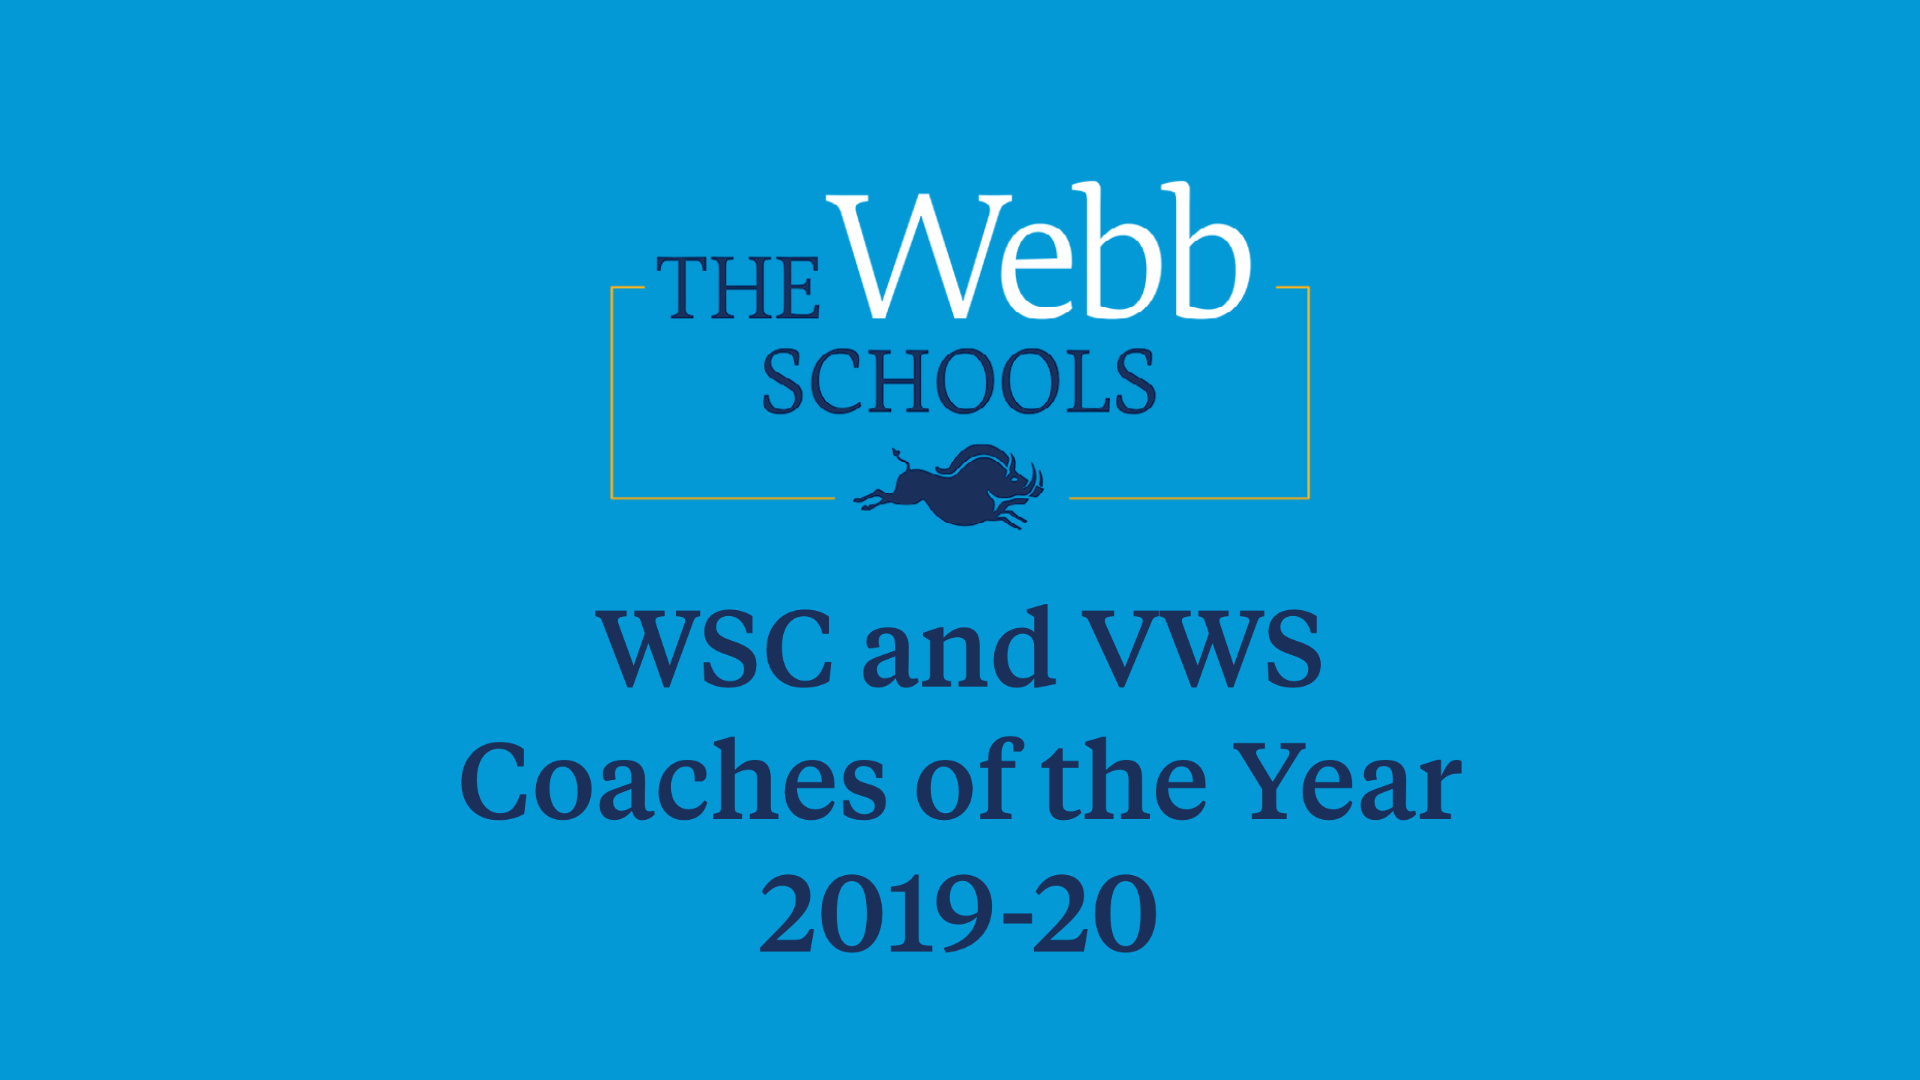 WSC and VWS Coaches of the Year Award